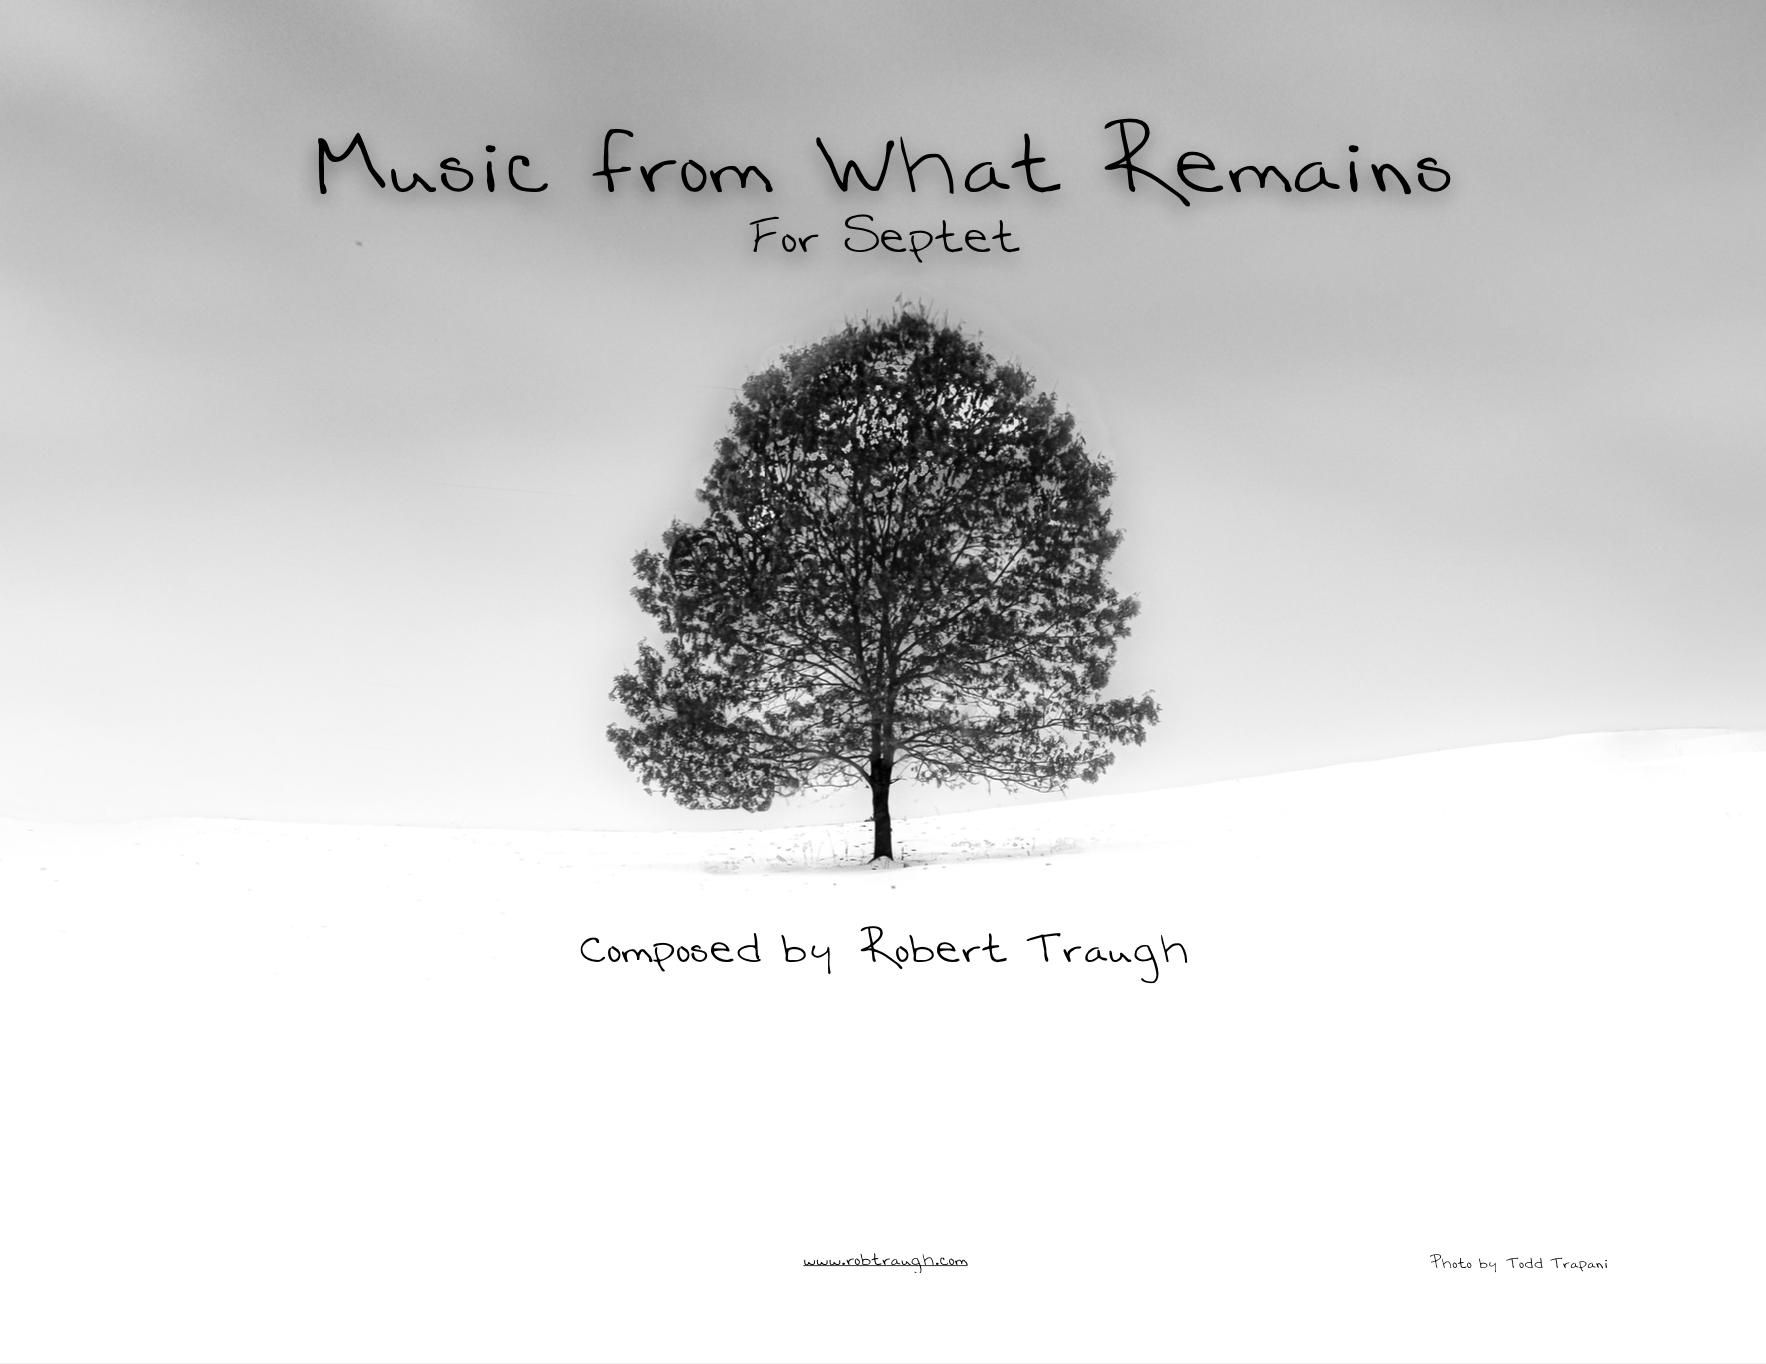 Music From What Remains by Robert Traugh